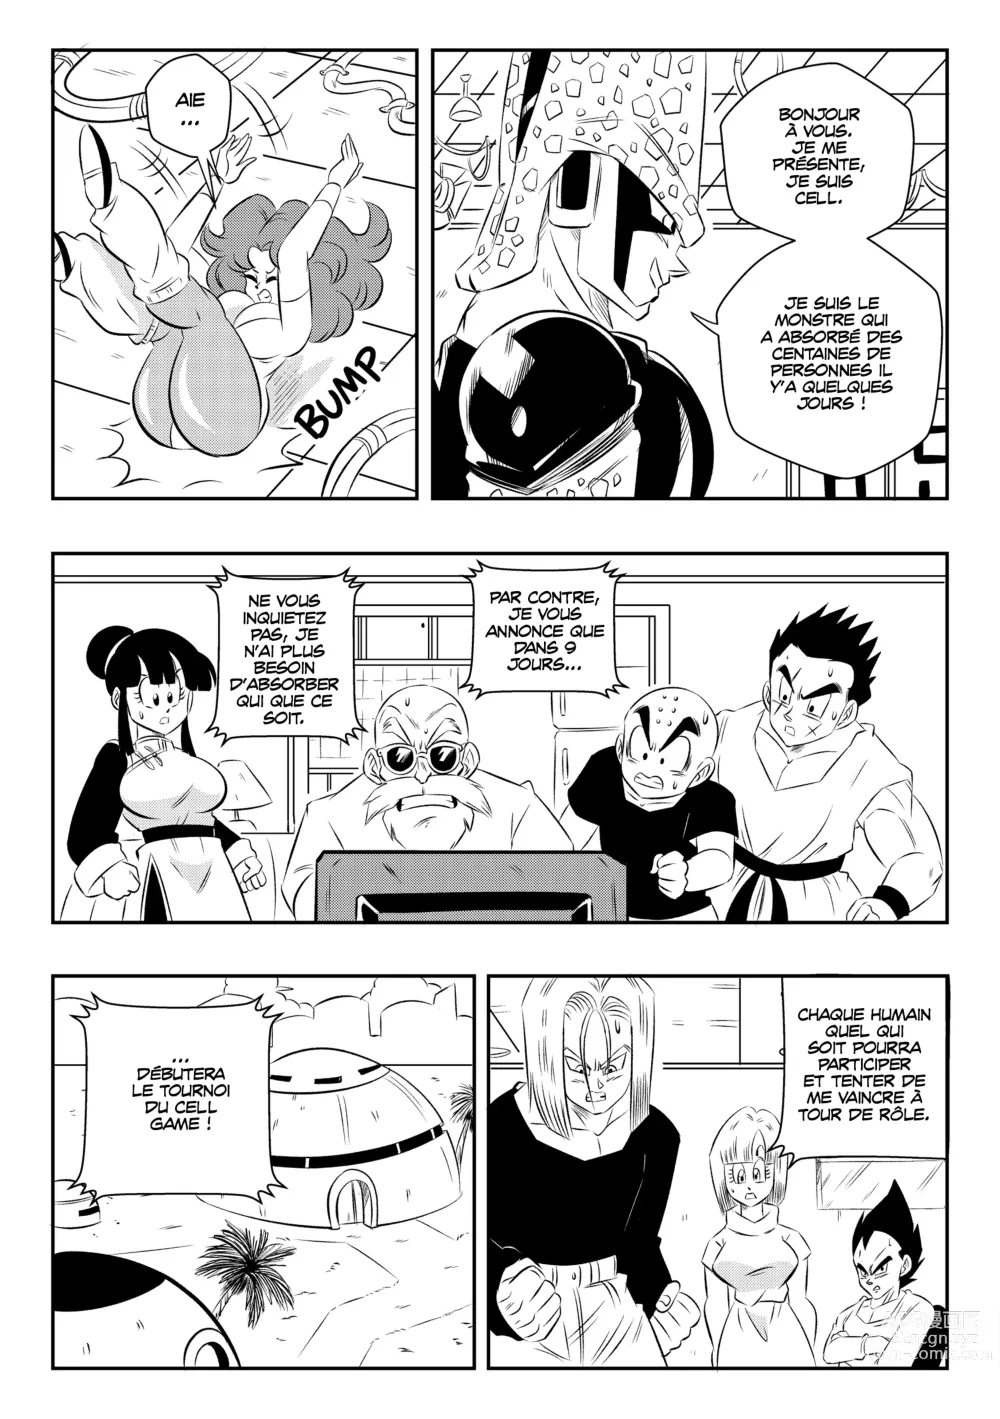 Page 6 of doujinshi perfect broascast